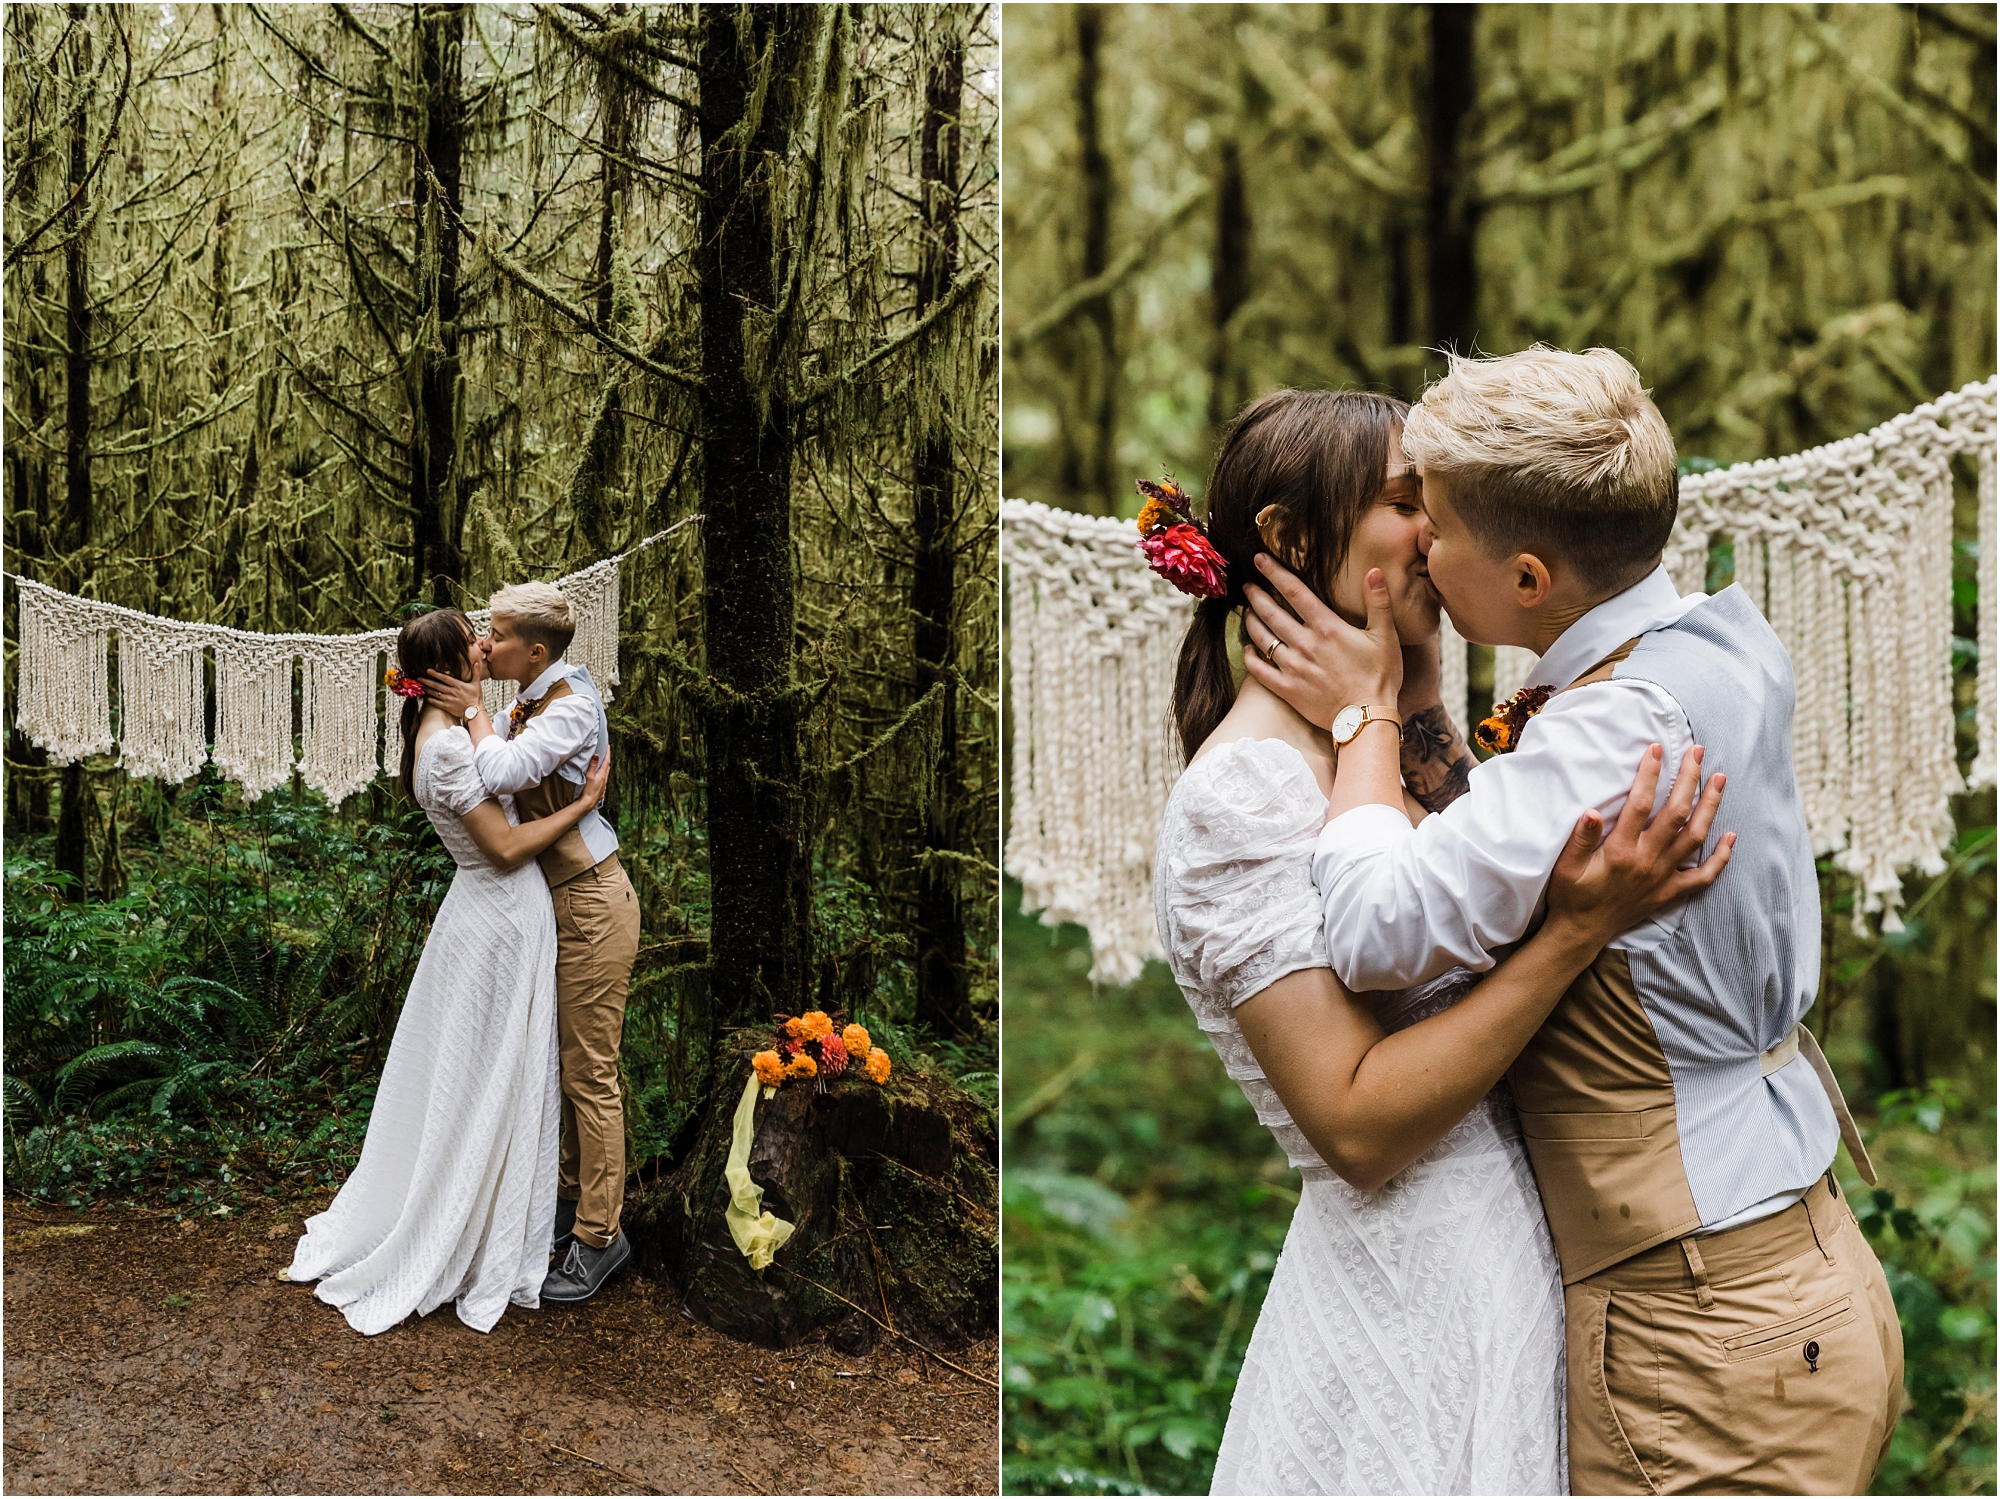 A LGBTQ+ couple shares a kiss to seal their wedding vows at their intimate elopement in the coastal forest of Oregon during their PNW hiking adventure elopement. | Erica Swantek Photography